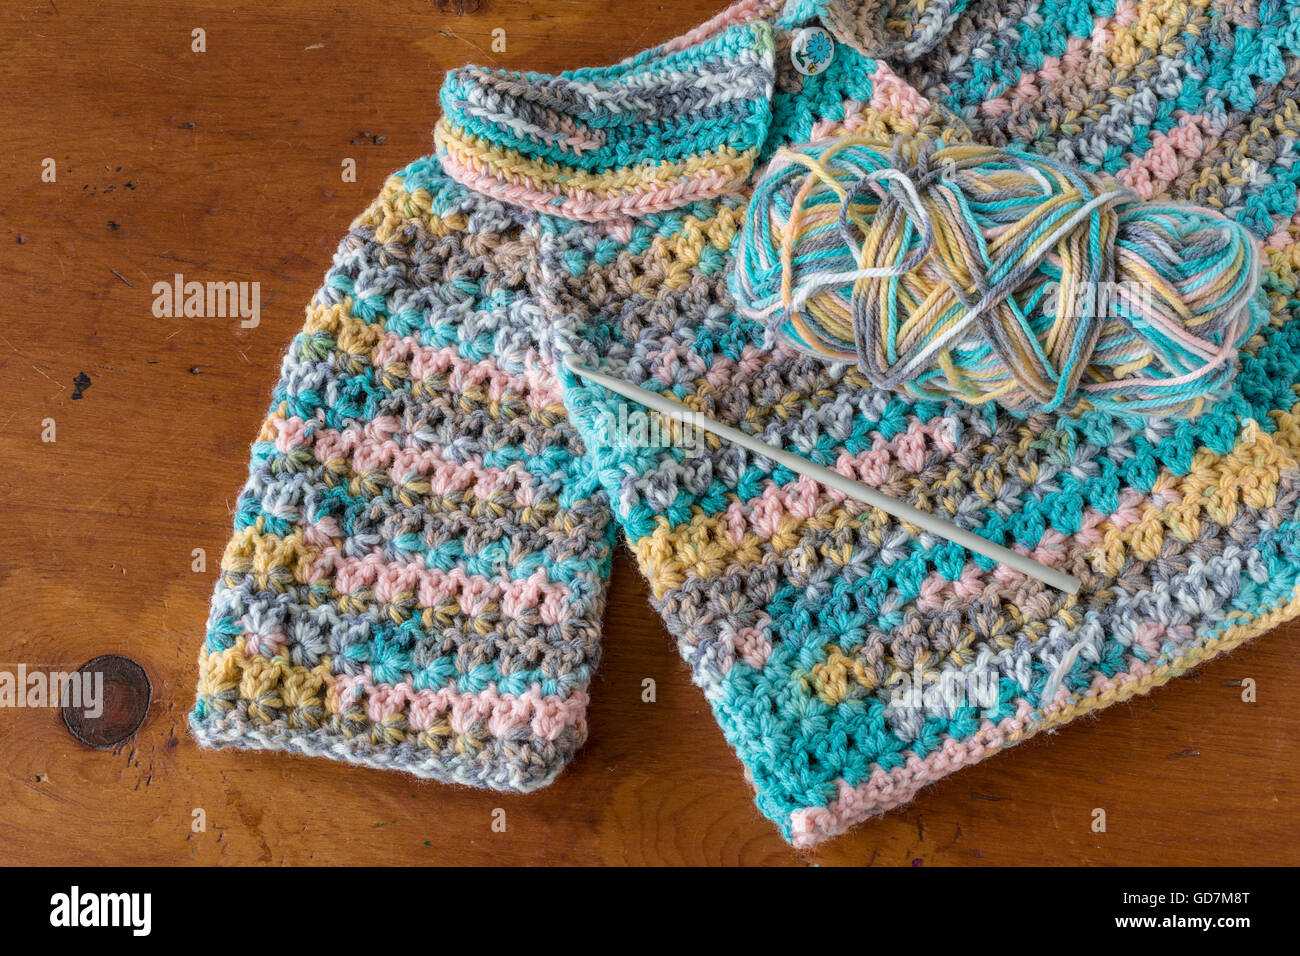 Crocheted baby sweater with a crochet hook and skein of yarn. Stock Photo